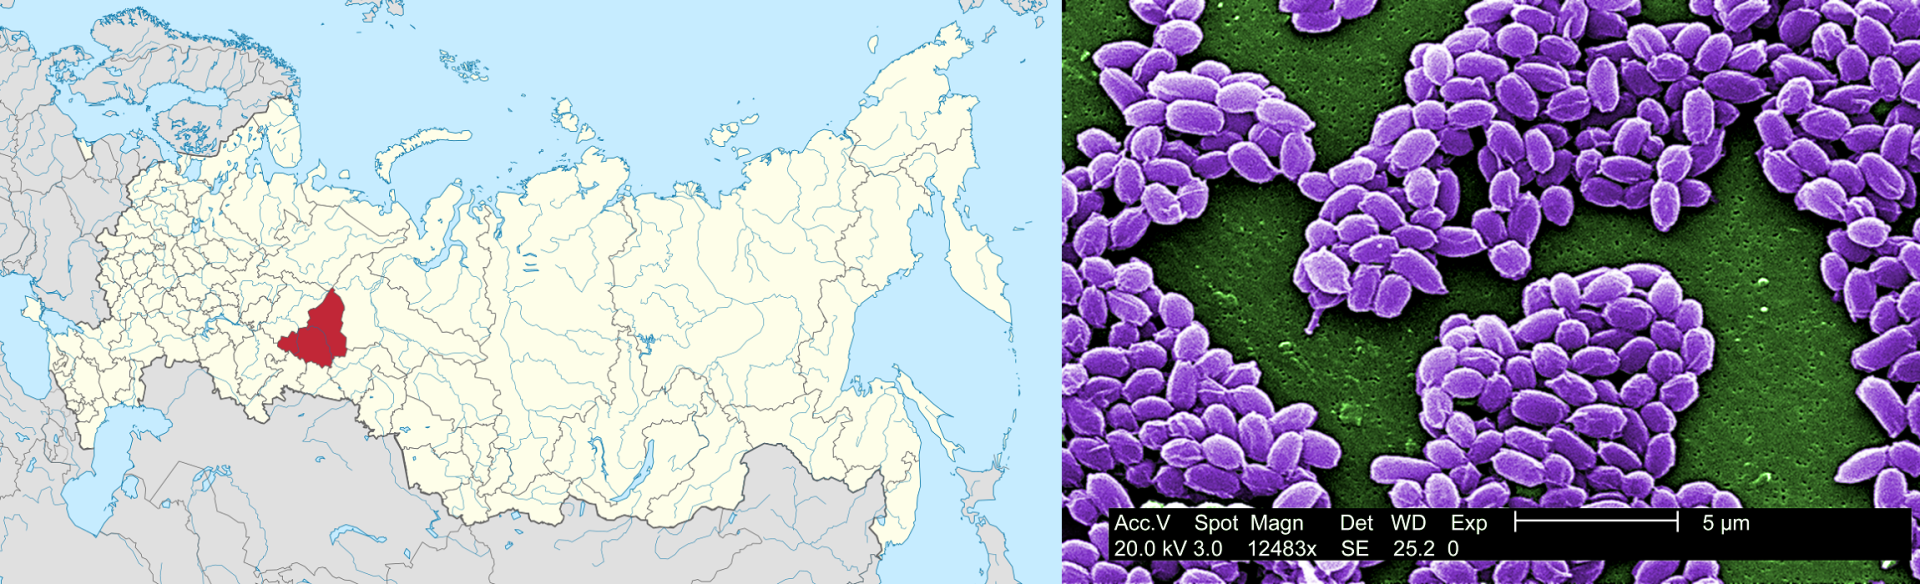 Map showing Sverdlovsk, in Union of Soviet Socialist Republics (USSR) and image of bacillus anthracis spores